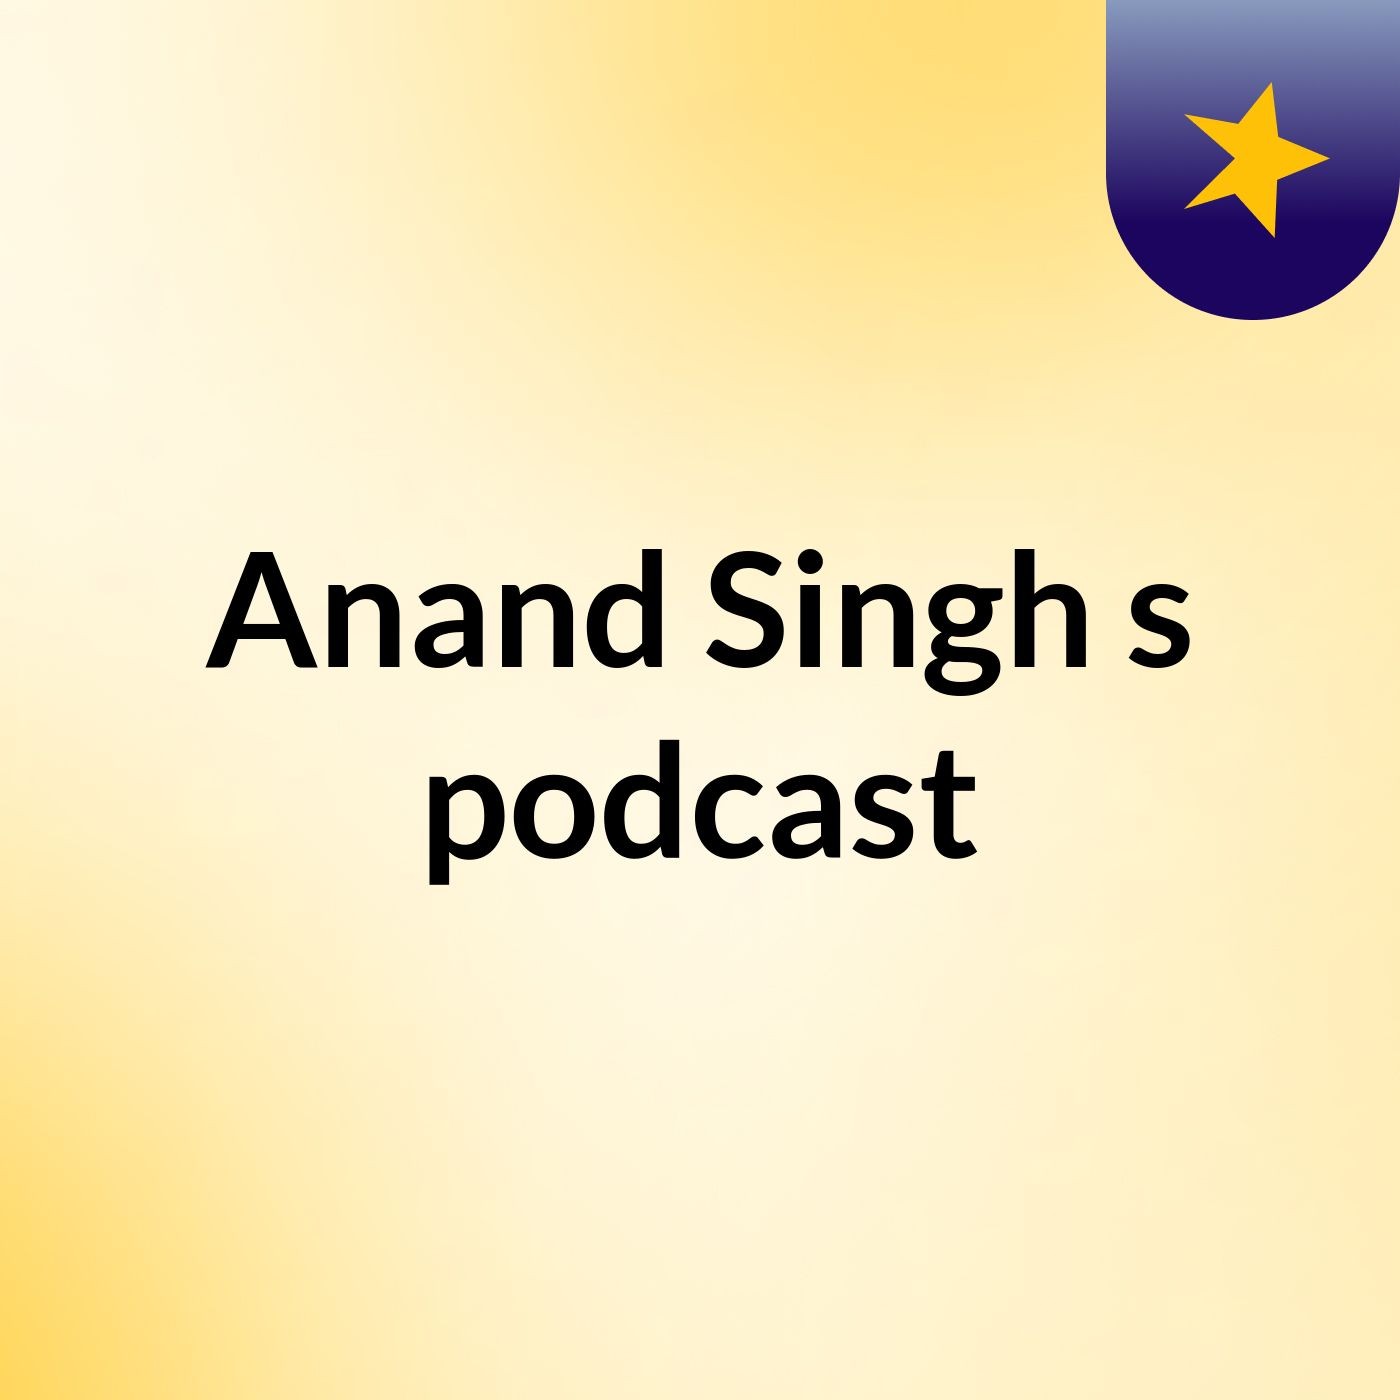 Episode 2 - Anand Singh's podcast